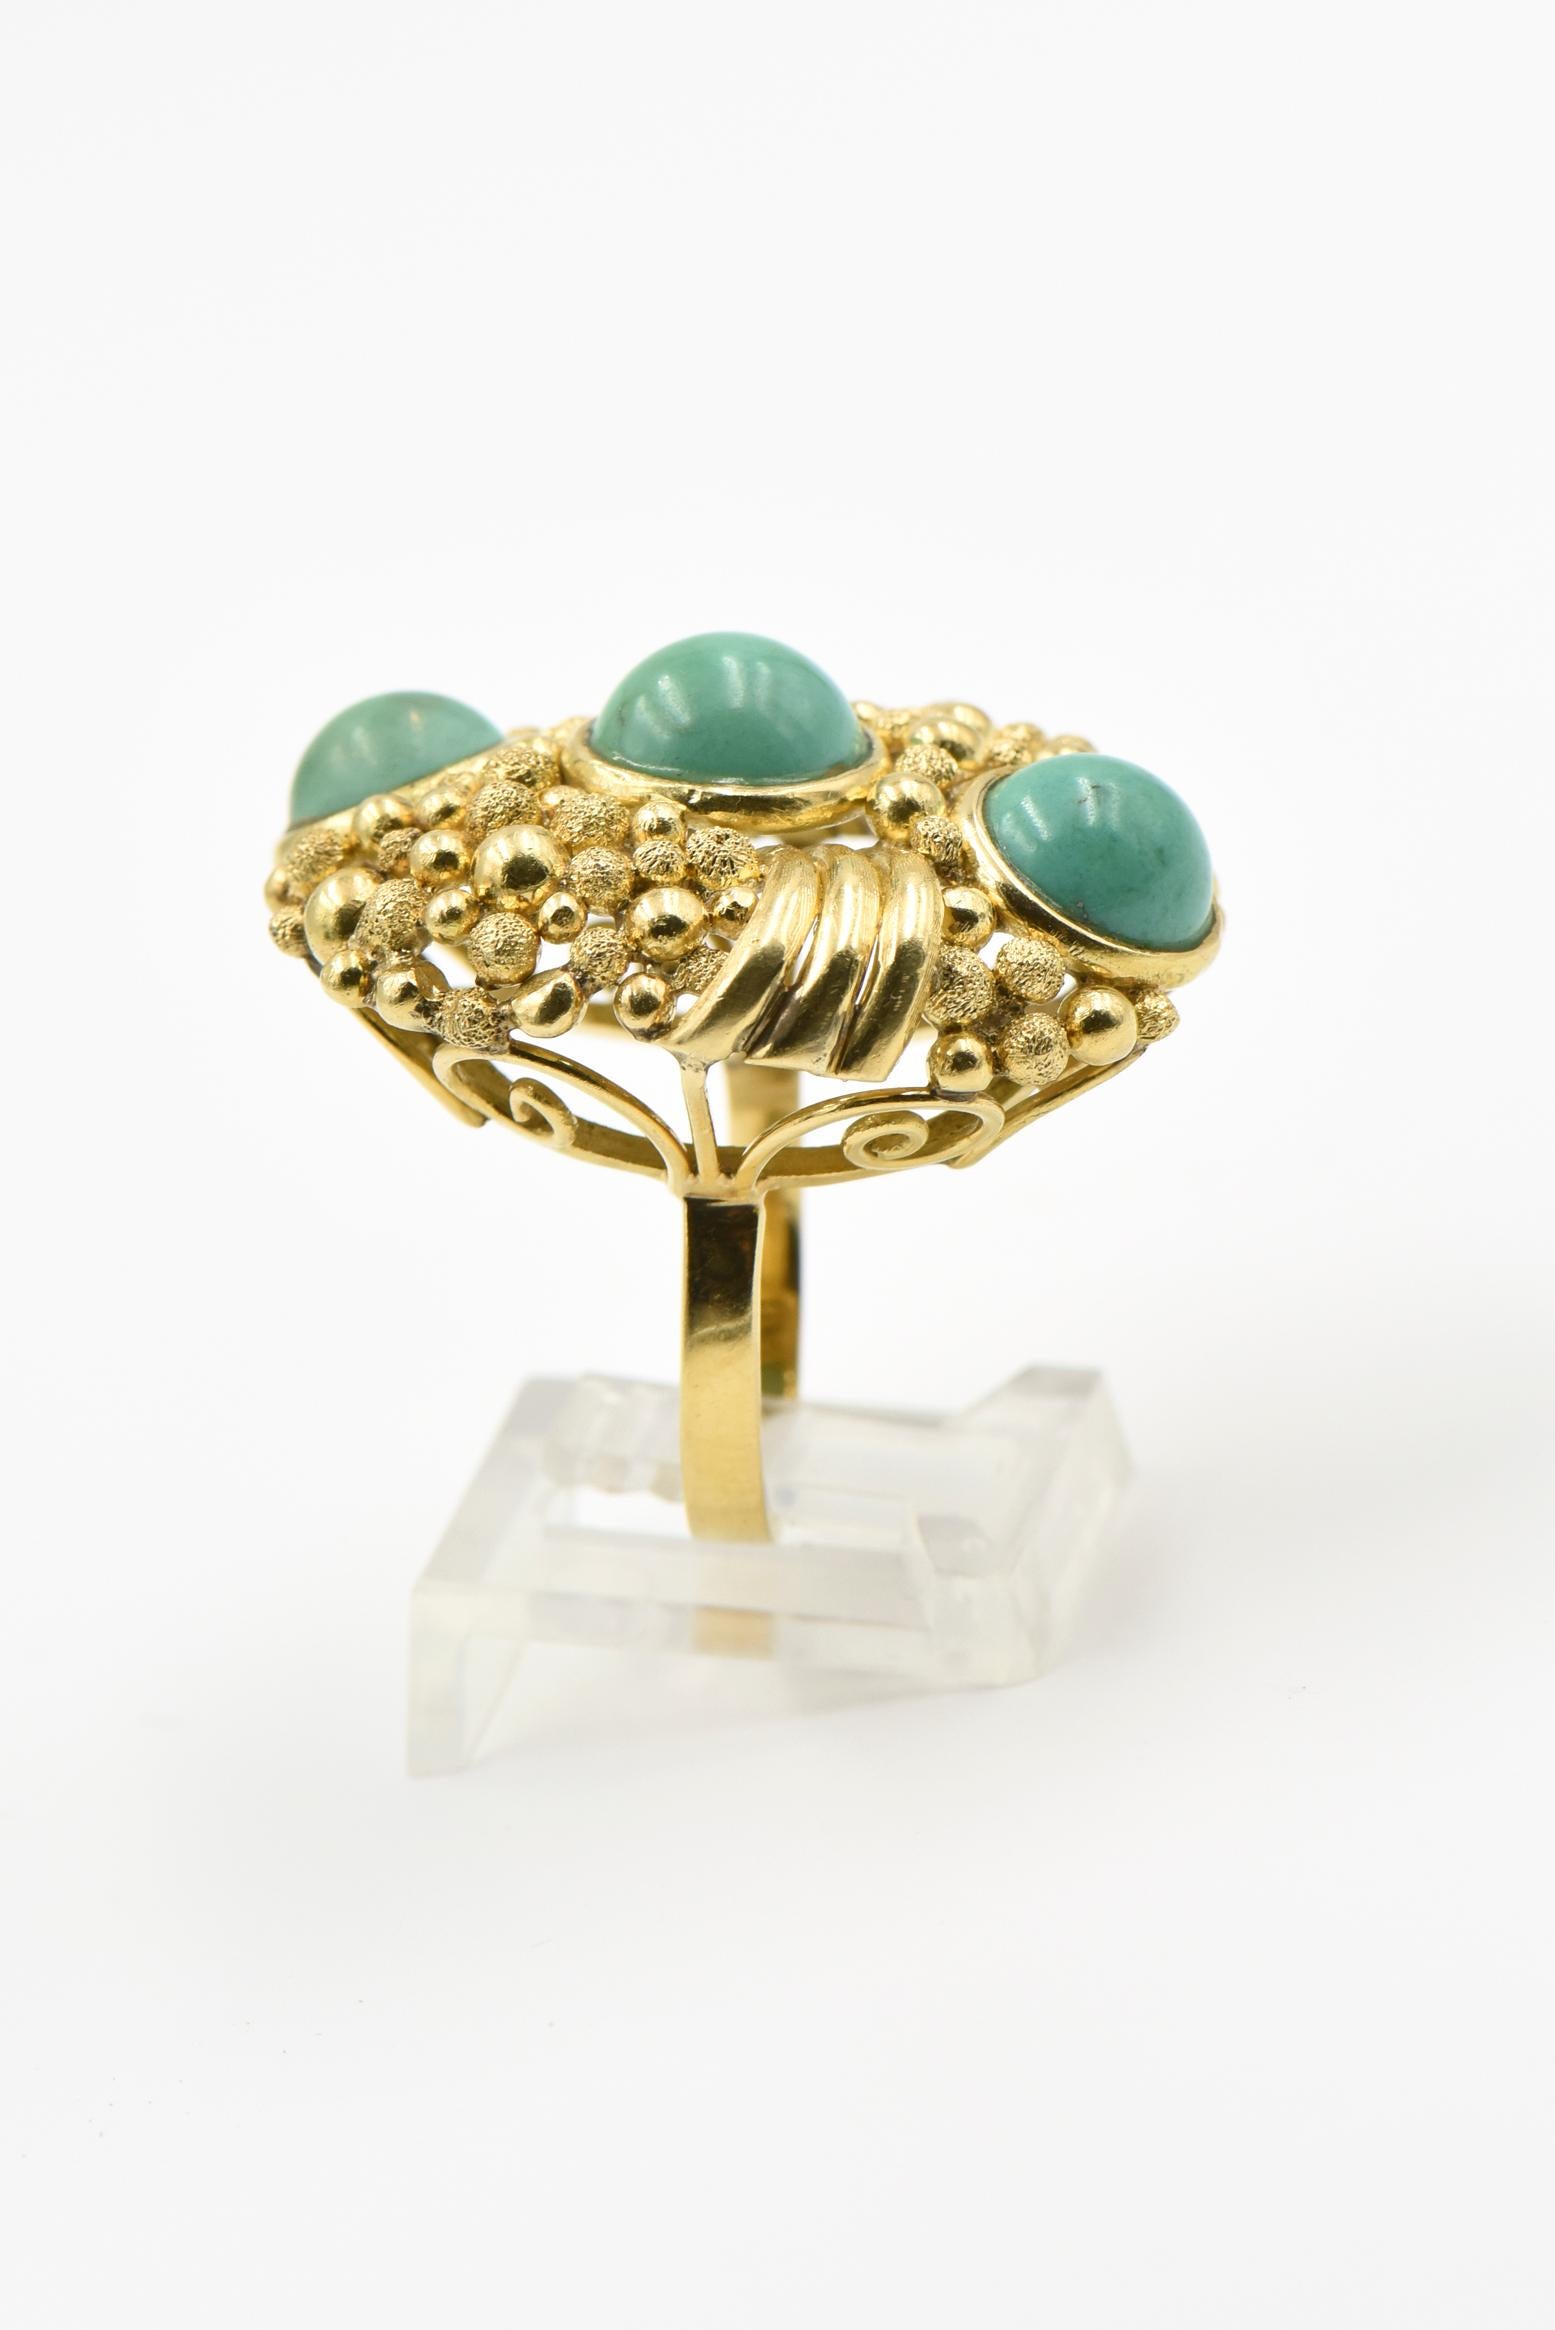 Large 1970s Modern Textured Design Turquoise Gold Statement Ring In Good Condition For Sale In Miami Beach, FL